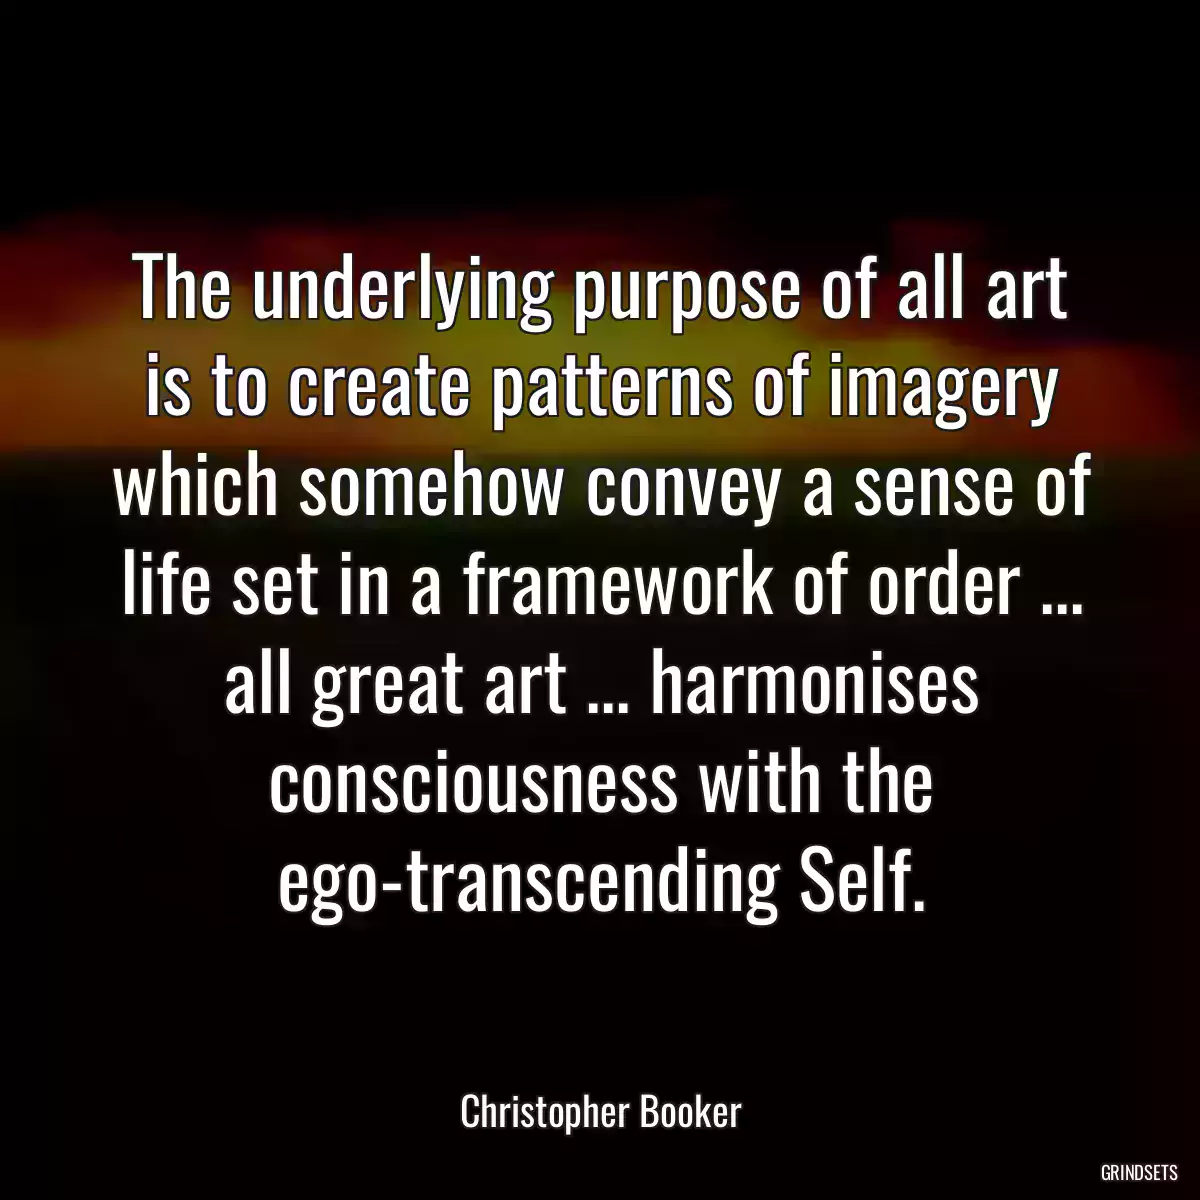 The underlying purpose of all art is to create patterns of imagery which somehow convey a sense of life set in a framework of order ... all great art ... harmonises consciousness with the ego-transcending Self.